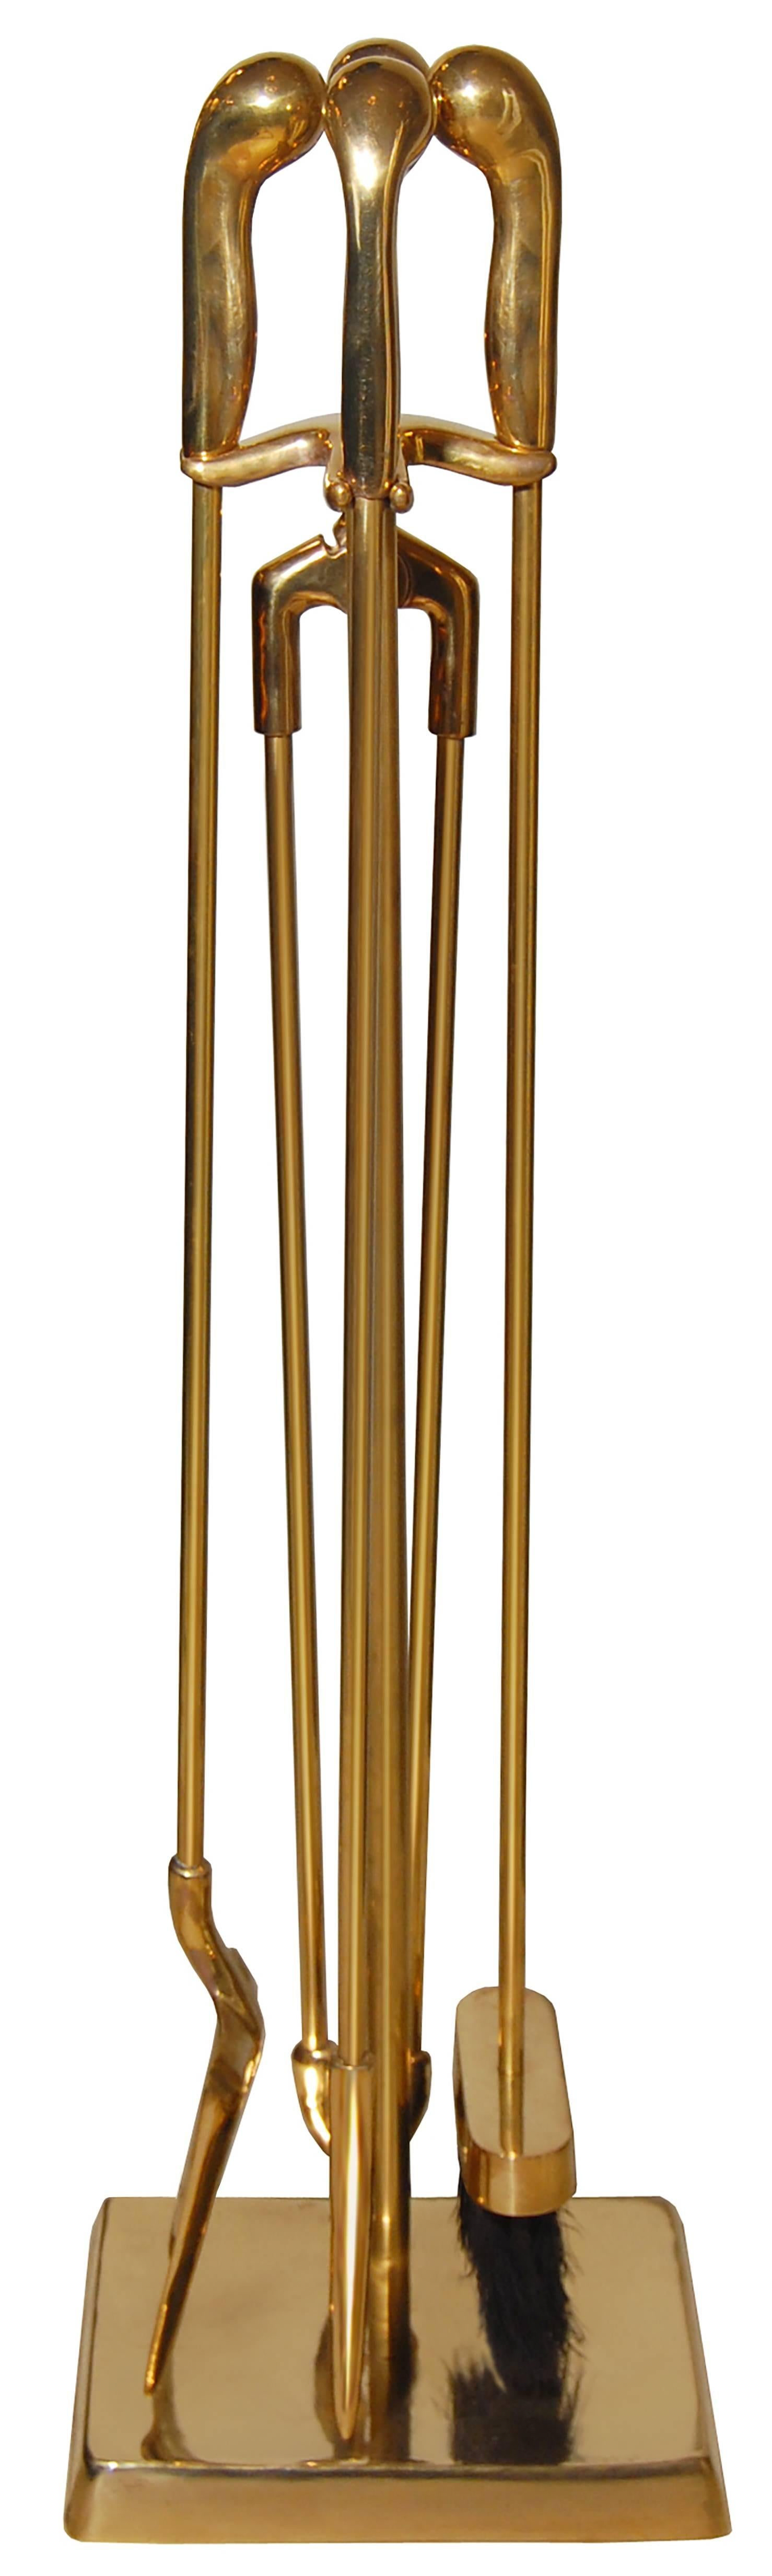 A five piece solid bronze fireplace tool set by Nancy Ruben for Craig Van Den Brulle.

American. 

Made to order. 

Lead time 3 to 4 weeks.